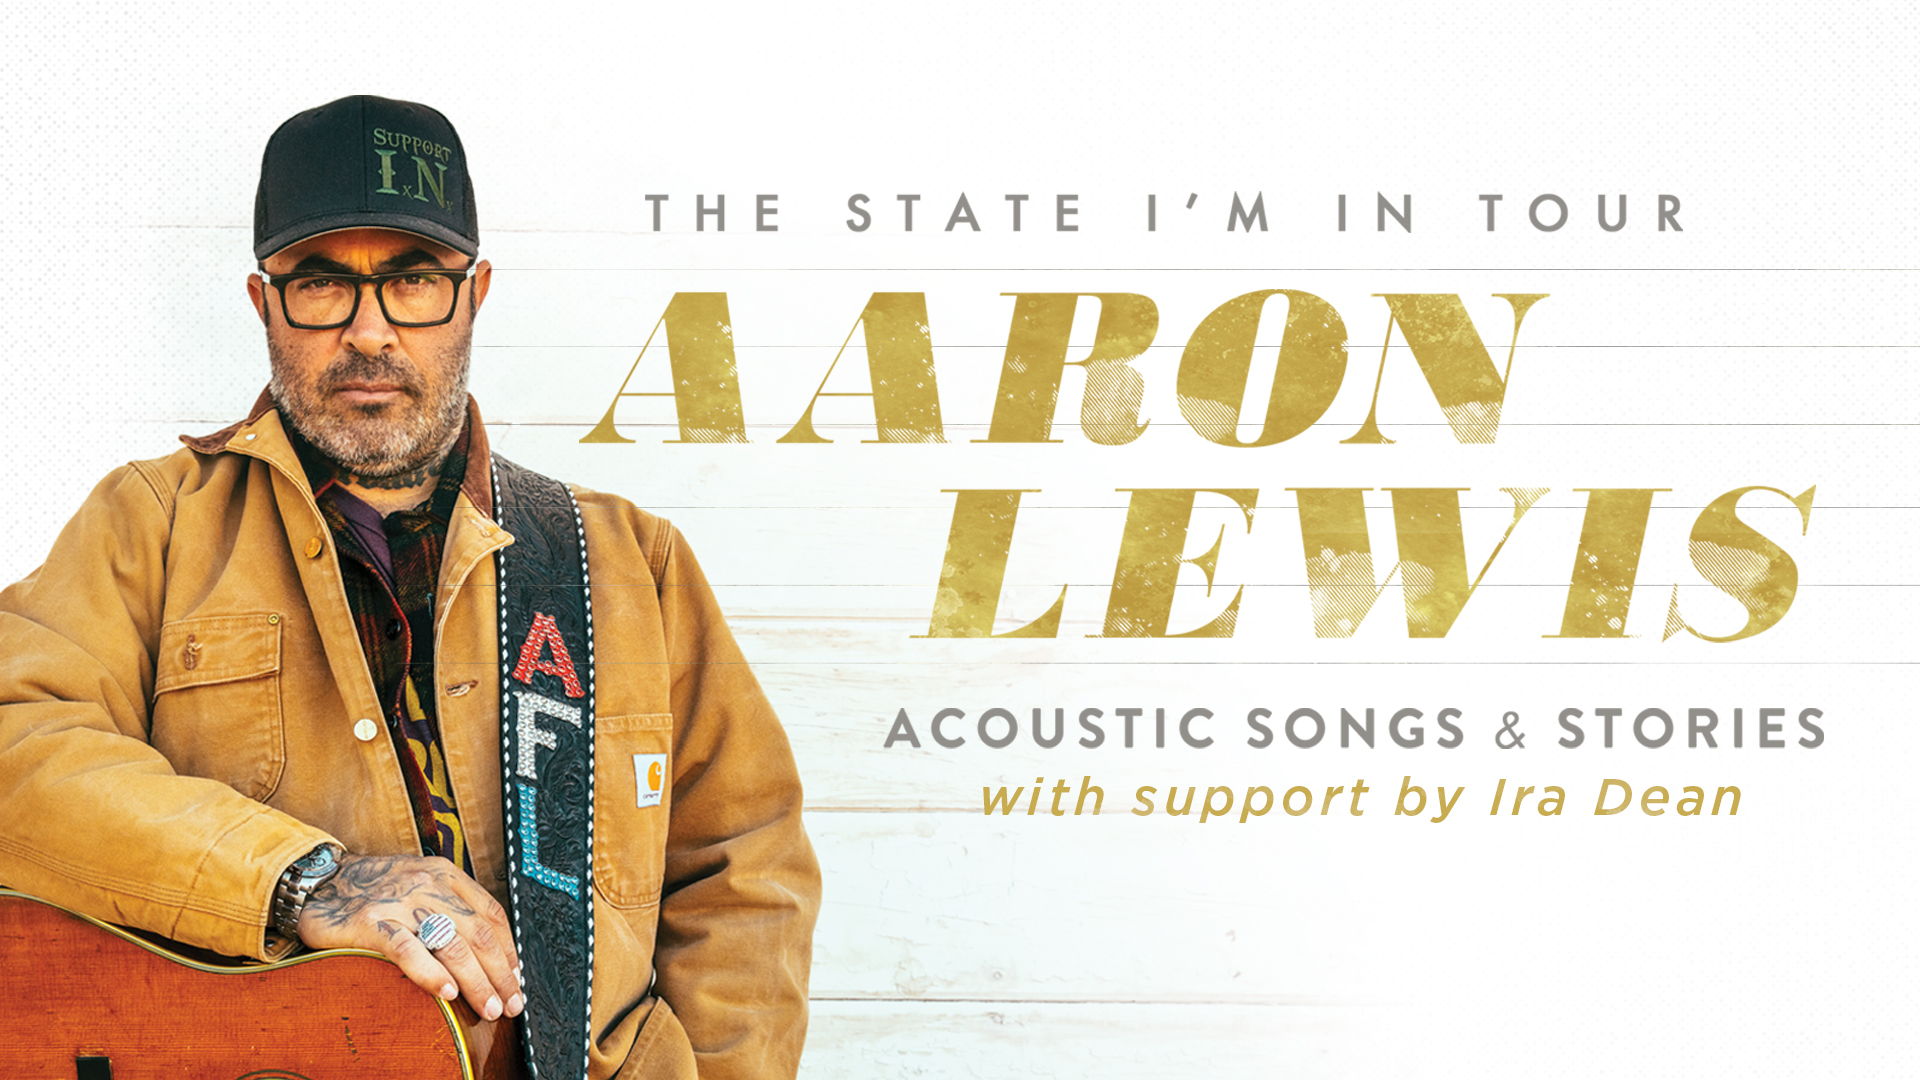 Aaron Lewis - Acoustic Songs & Stories promotional image